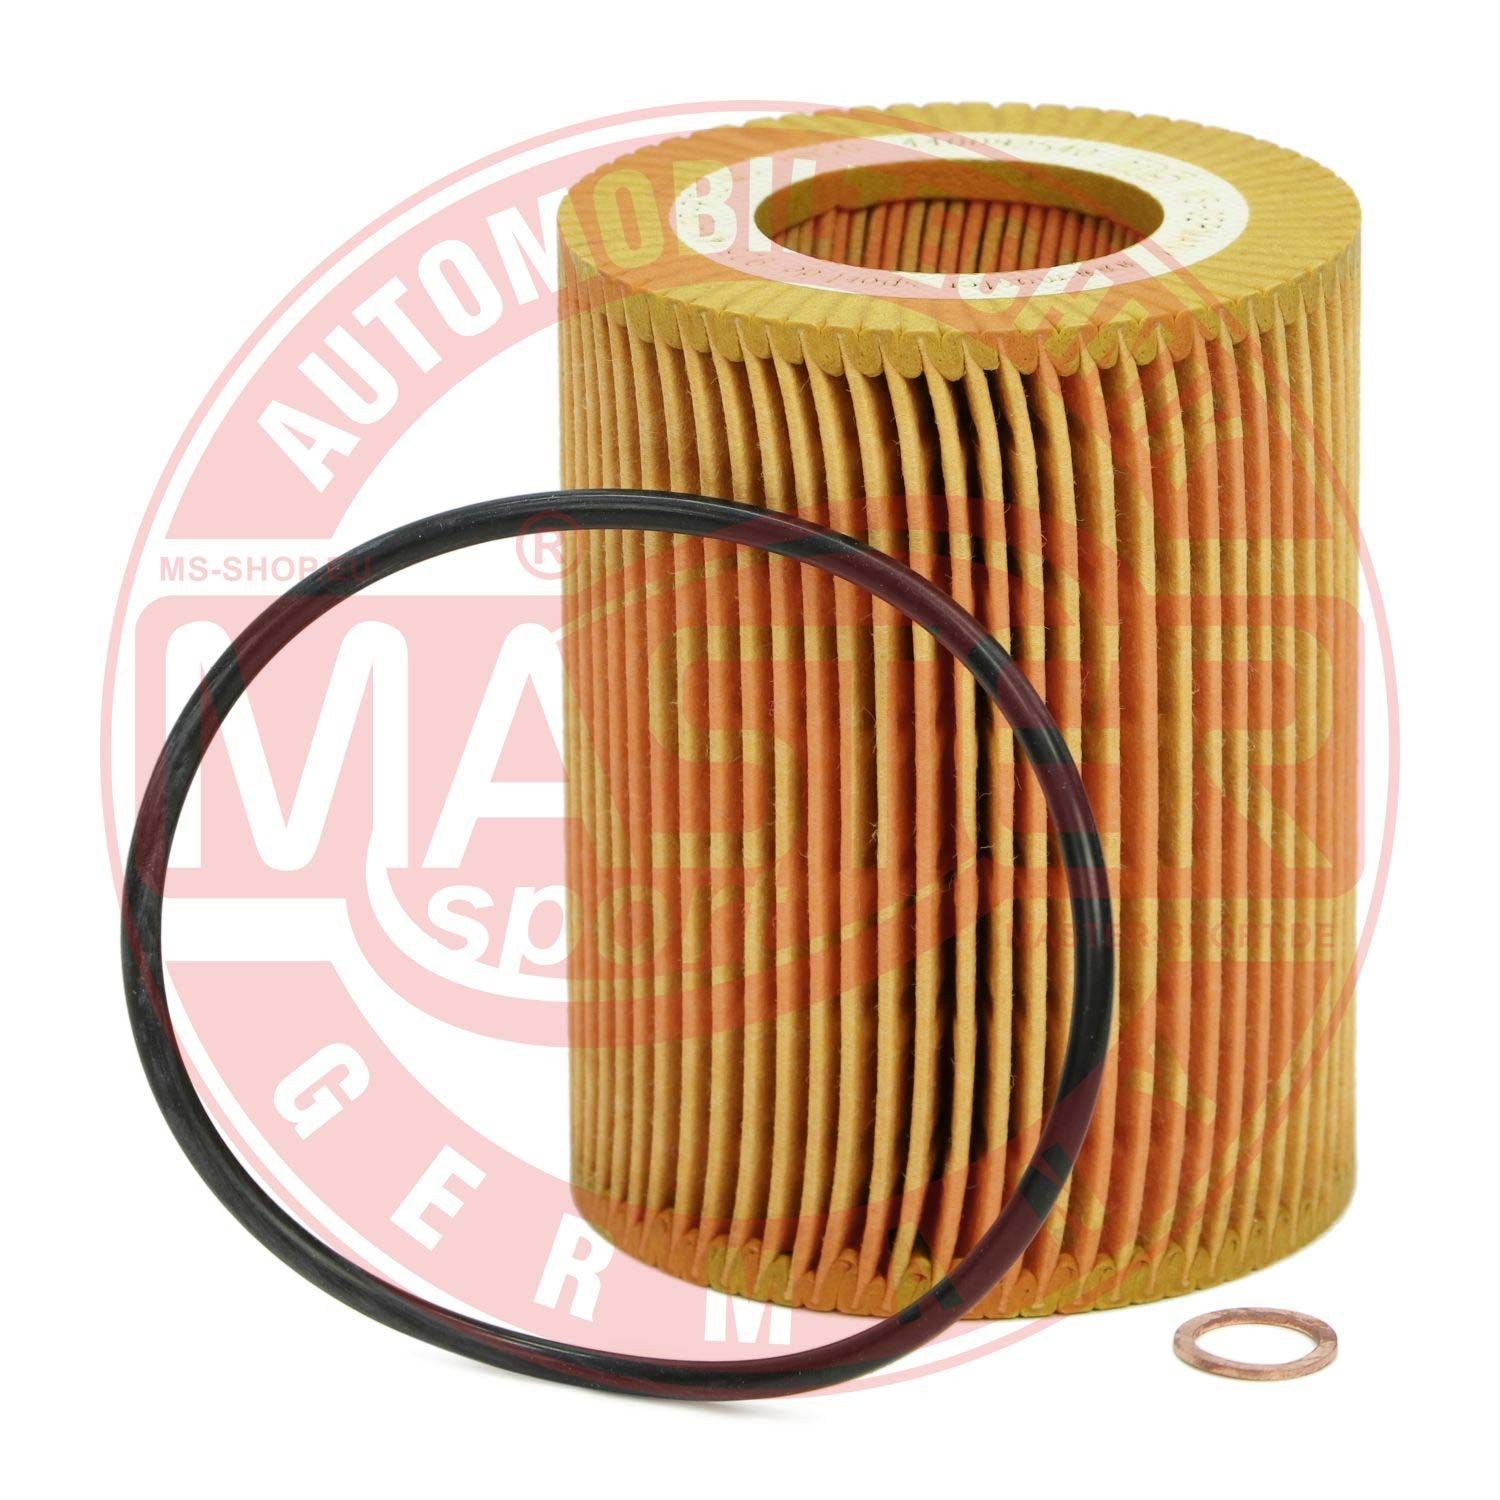 BMW 1 Series Oil filters 10506972 MASTER-SPORT 925/4X-OF-PCS-MS online buy